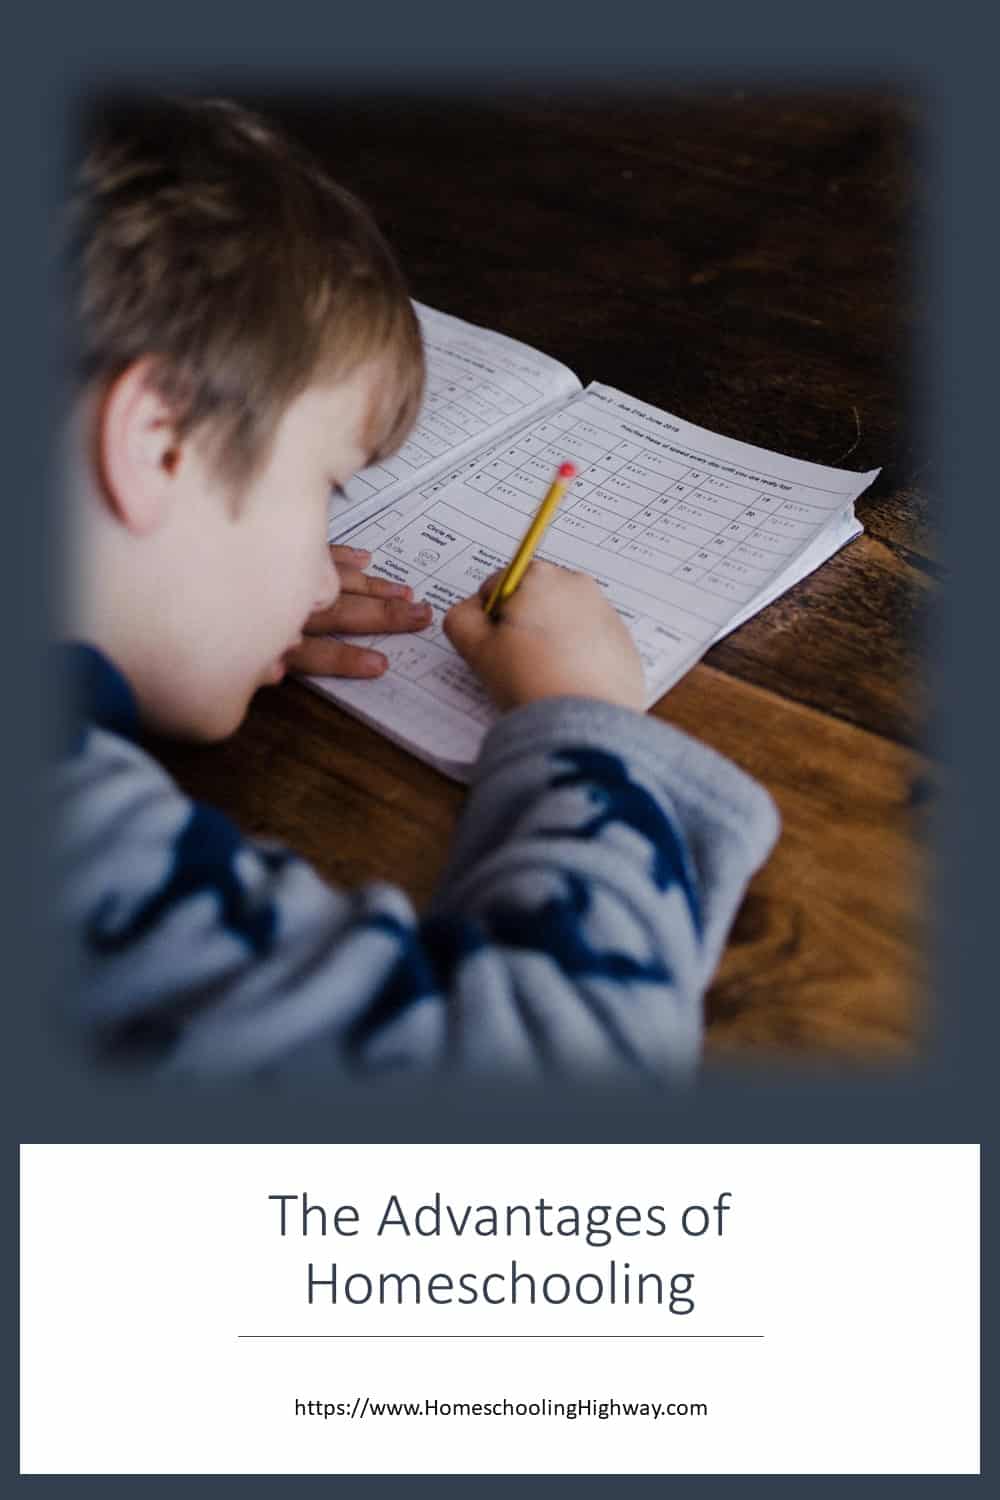 A little boy does his schoolwork. Advantages of Homeschooling by Homeschooling Highway